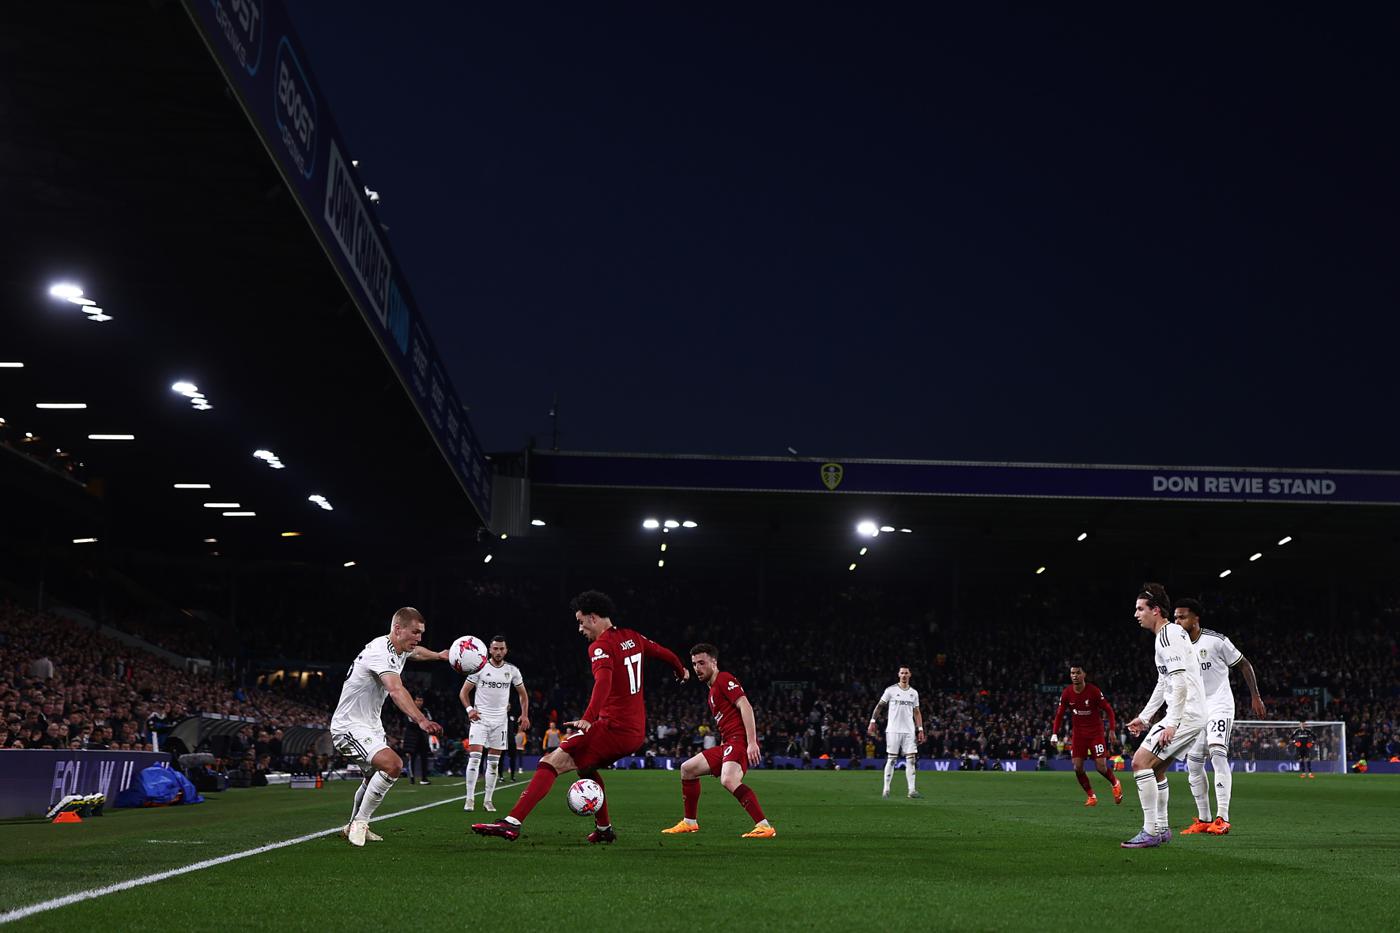 statistics Leeds - Liverpool - 1:6. English Championship, round 31. Review of the match,